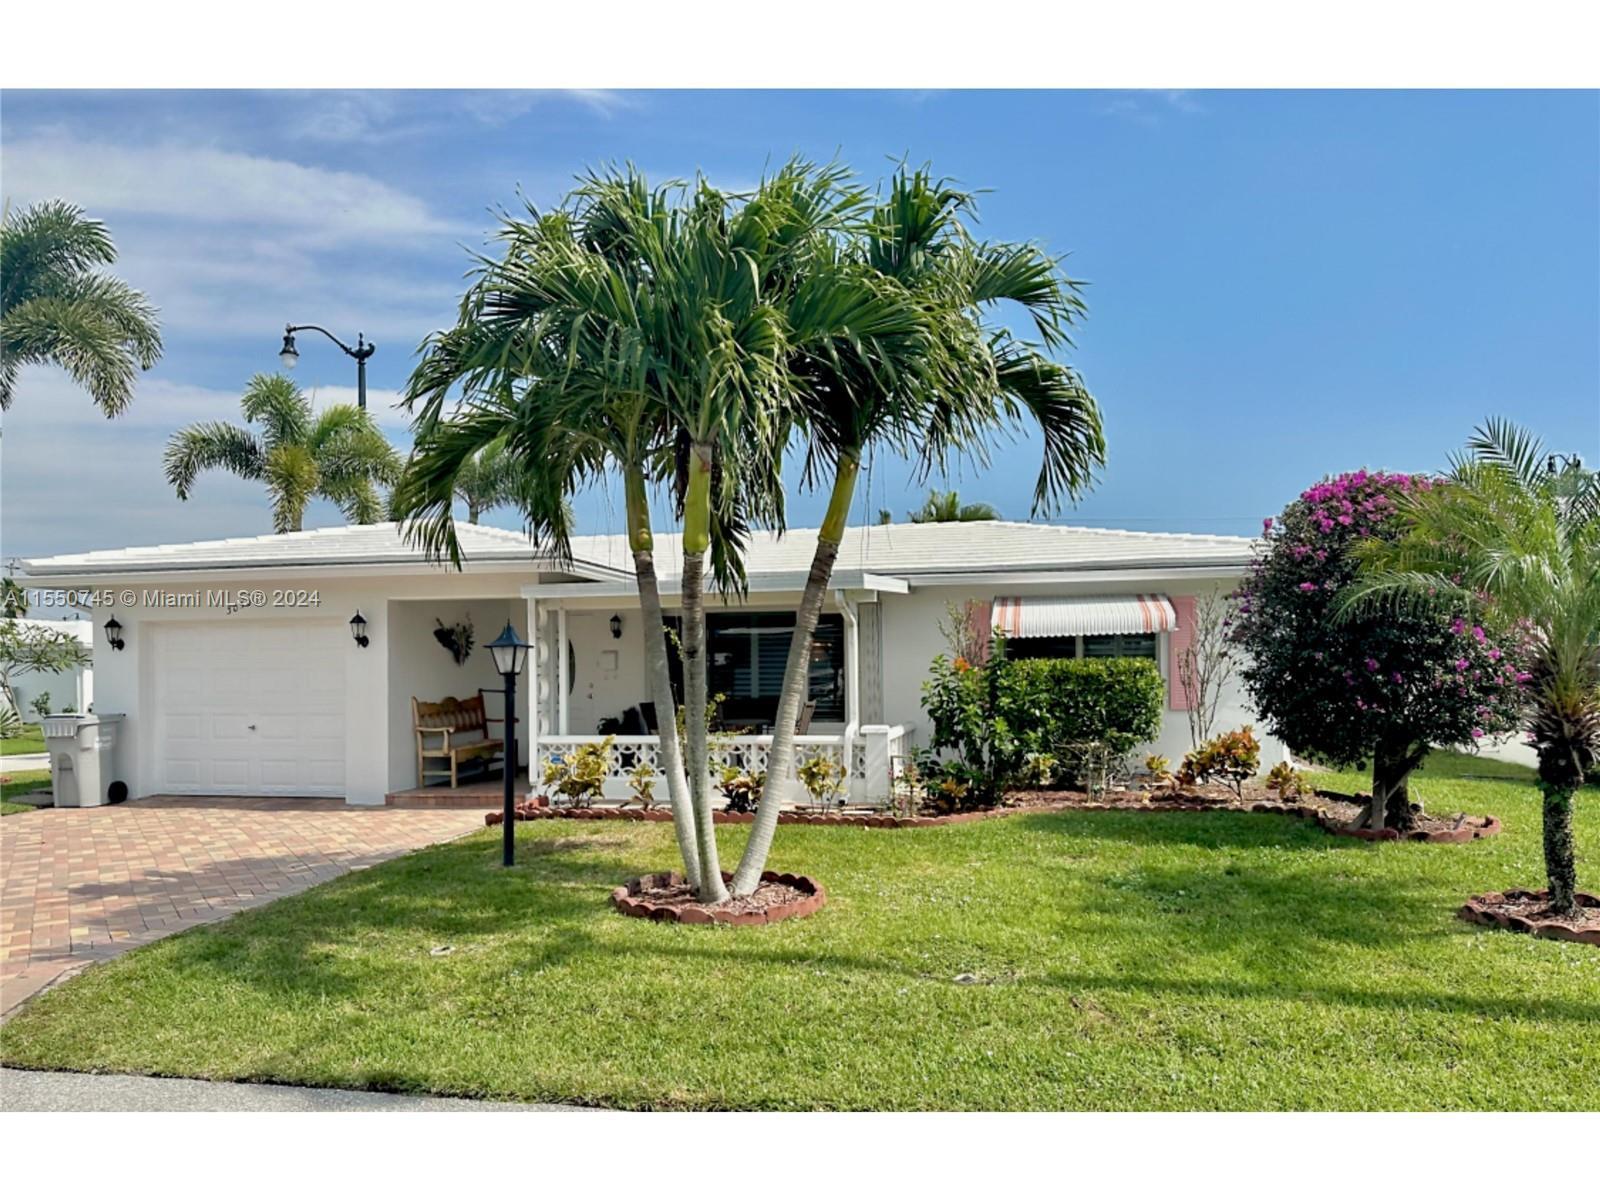 Just hitting the market, property for sale at 3050 Northwest 1st Drive, Pompano Beach, FL, USA. Move